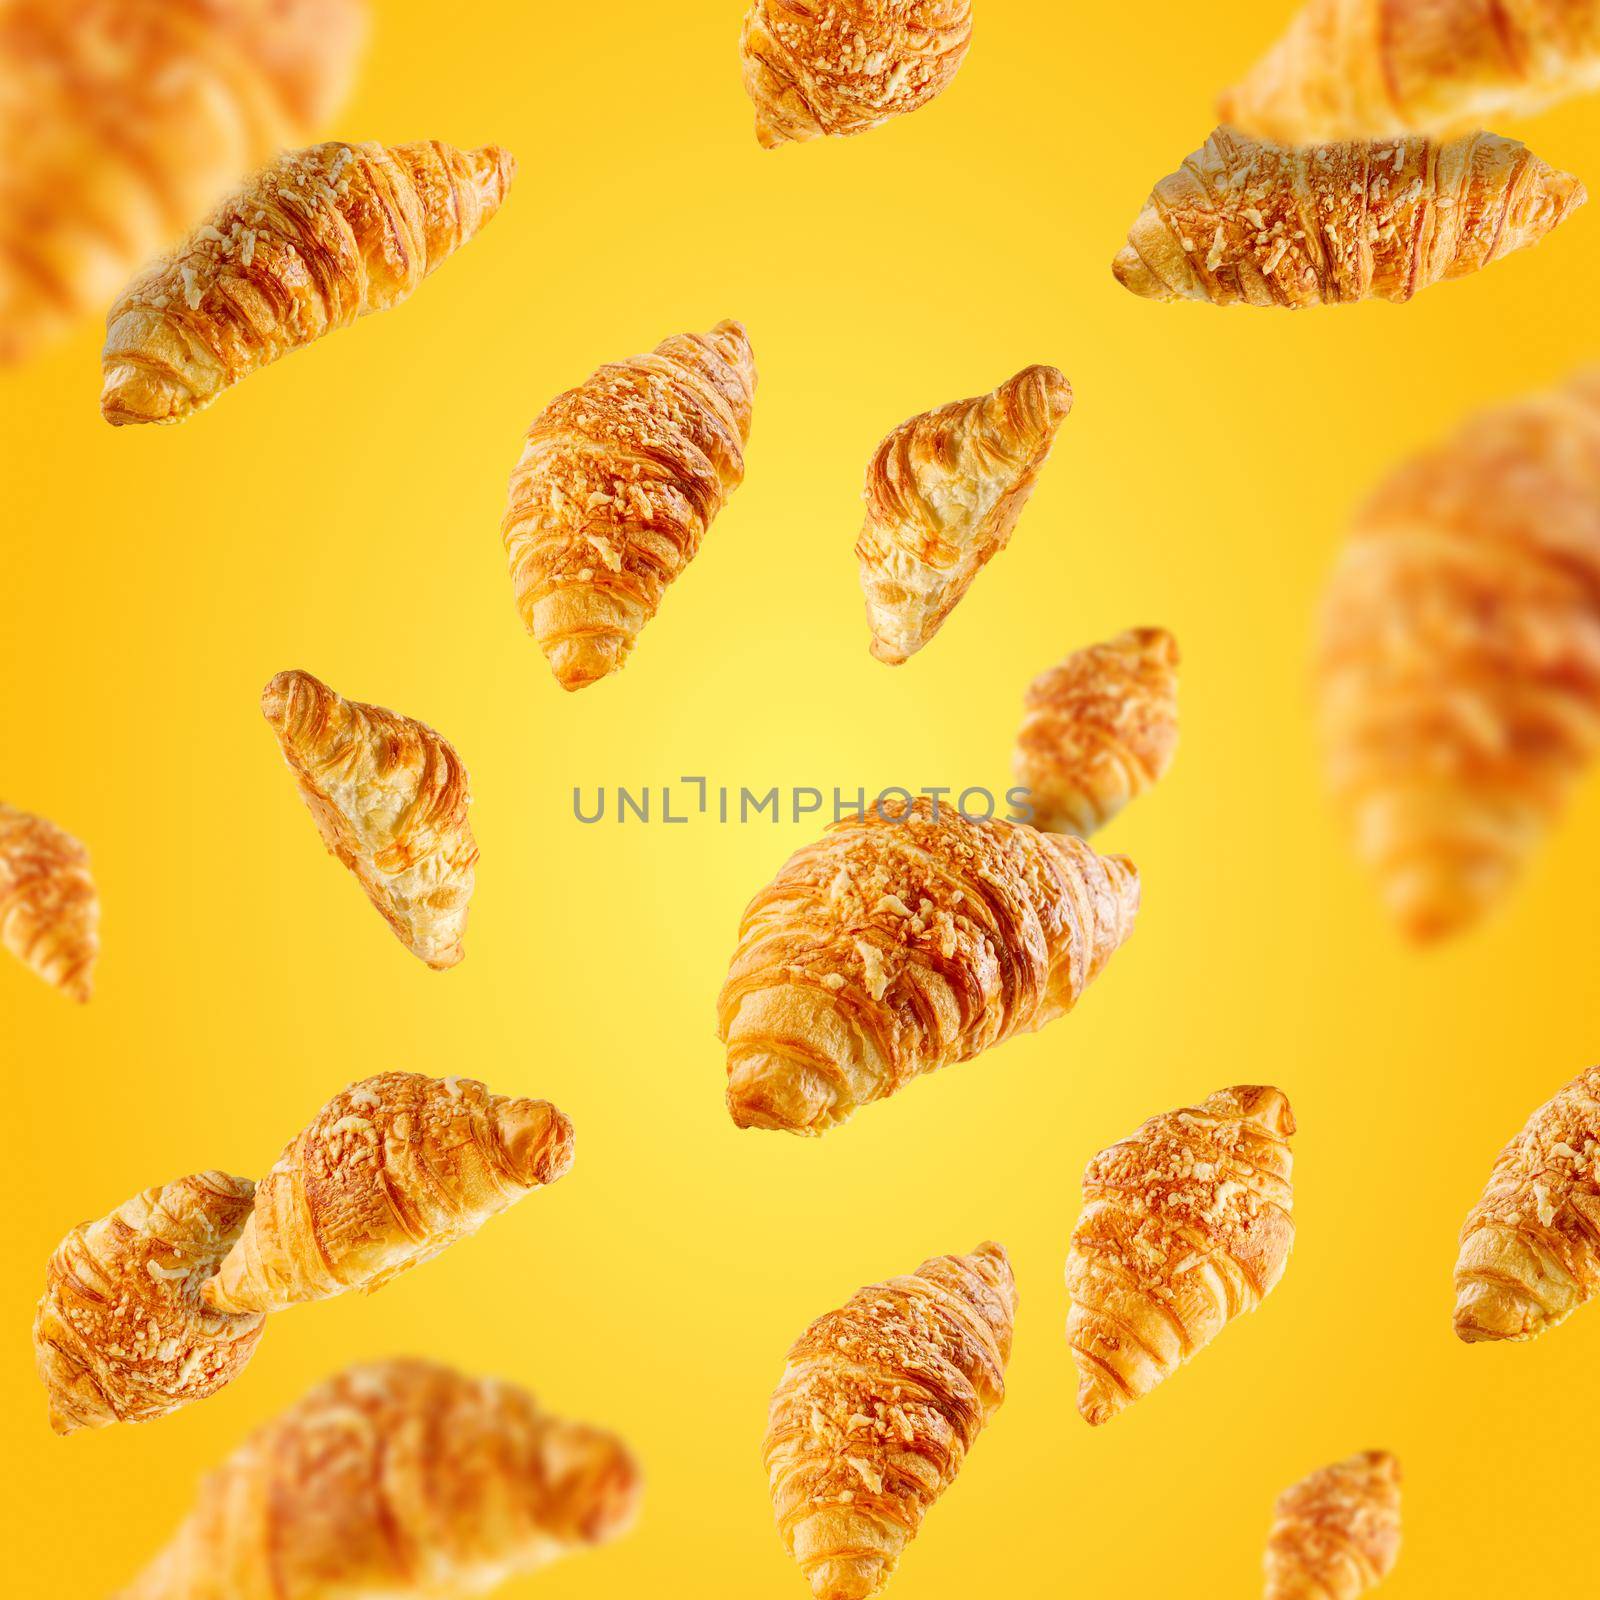 Falling fresh baked croissants with cheese. French pastry concept. Bakery pattern with baked croissant. Bakery breakfast concept